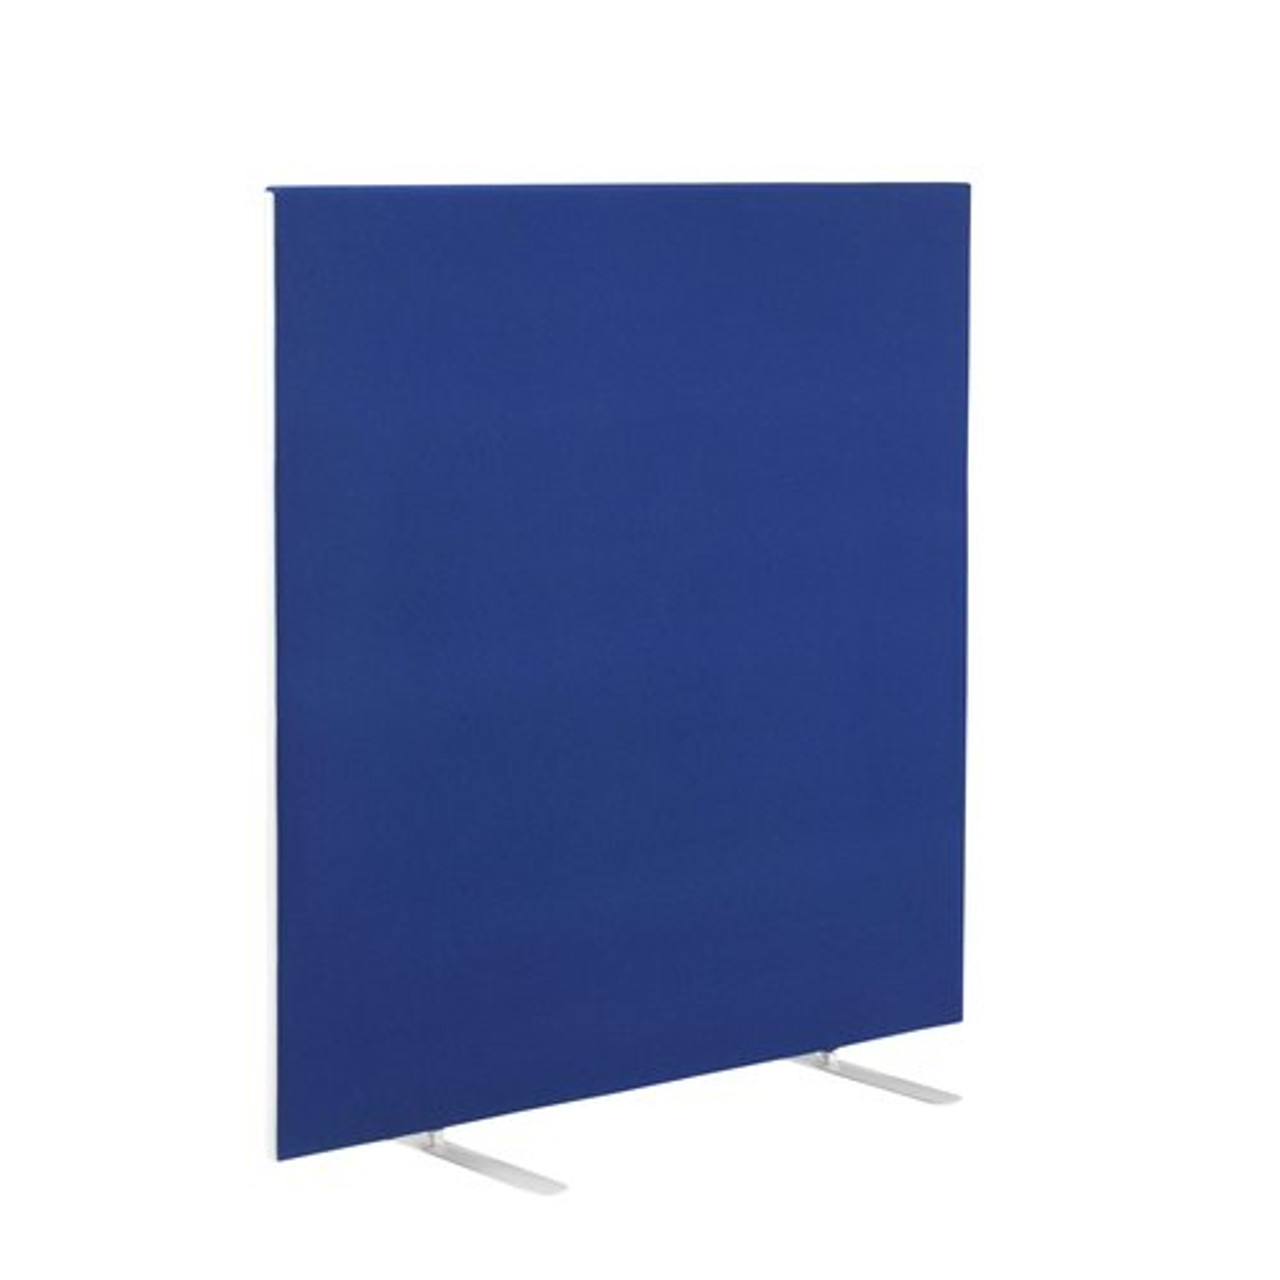 Freestanding Screens_screen partitions Chelmsford Essex_Tc Group_Blue. Office Furniture Bishop's Stortford